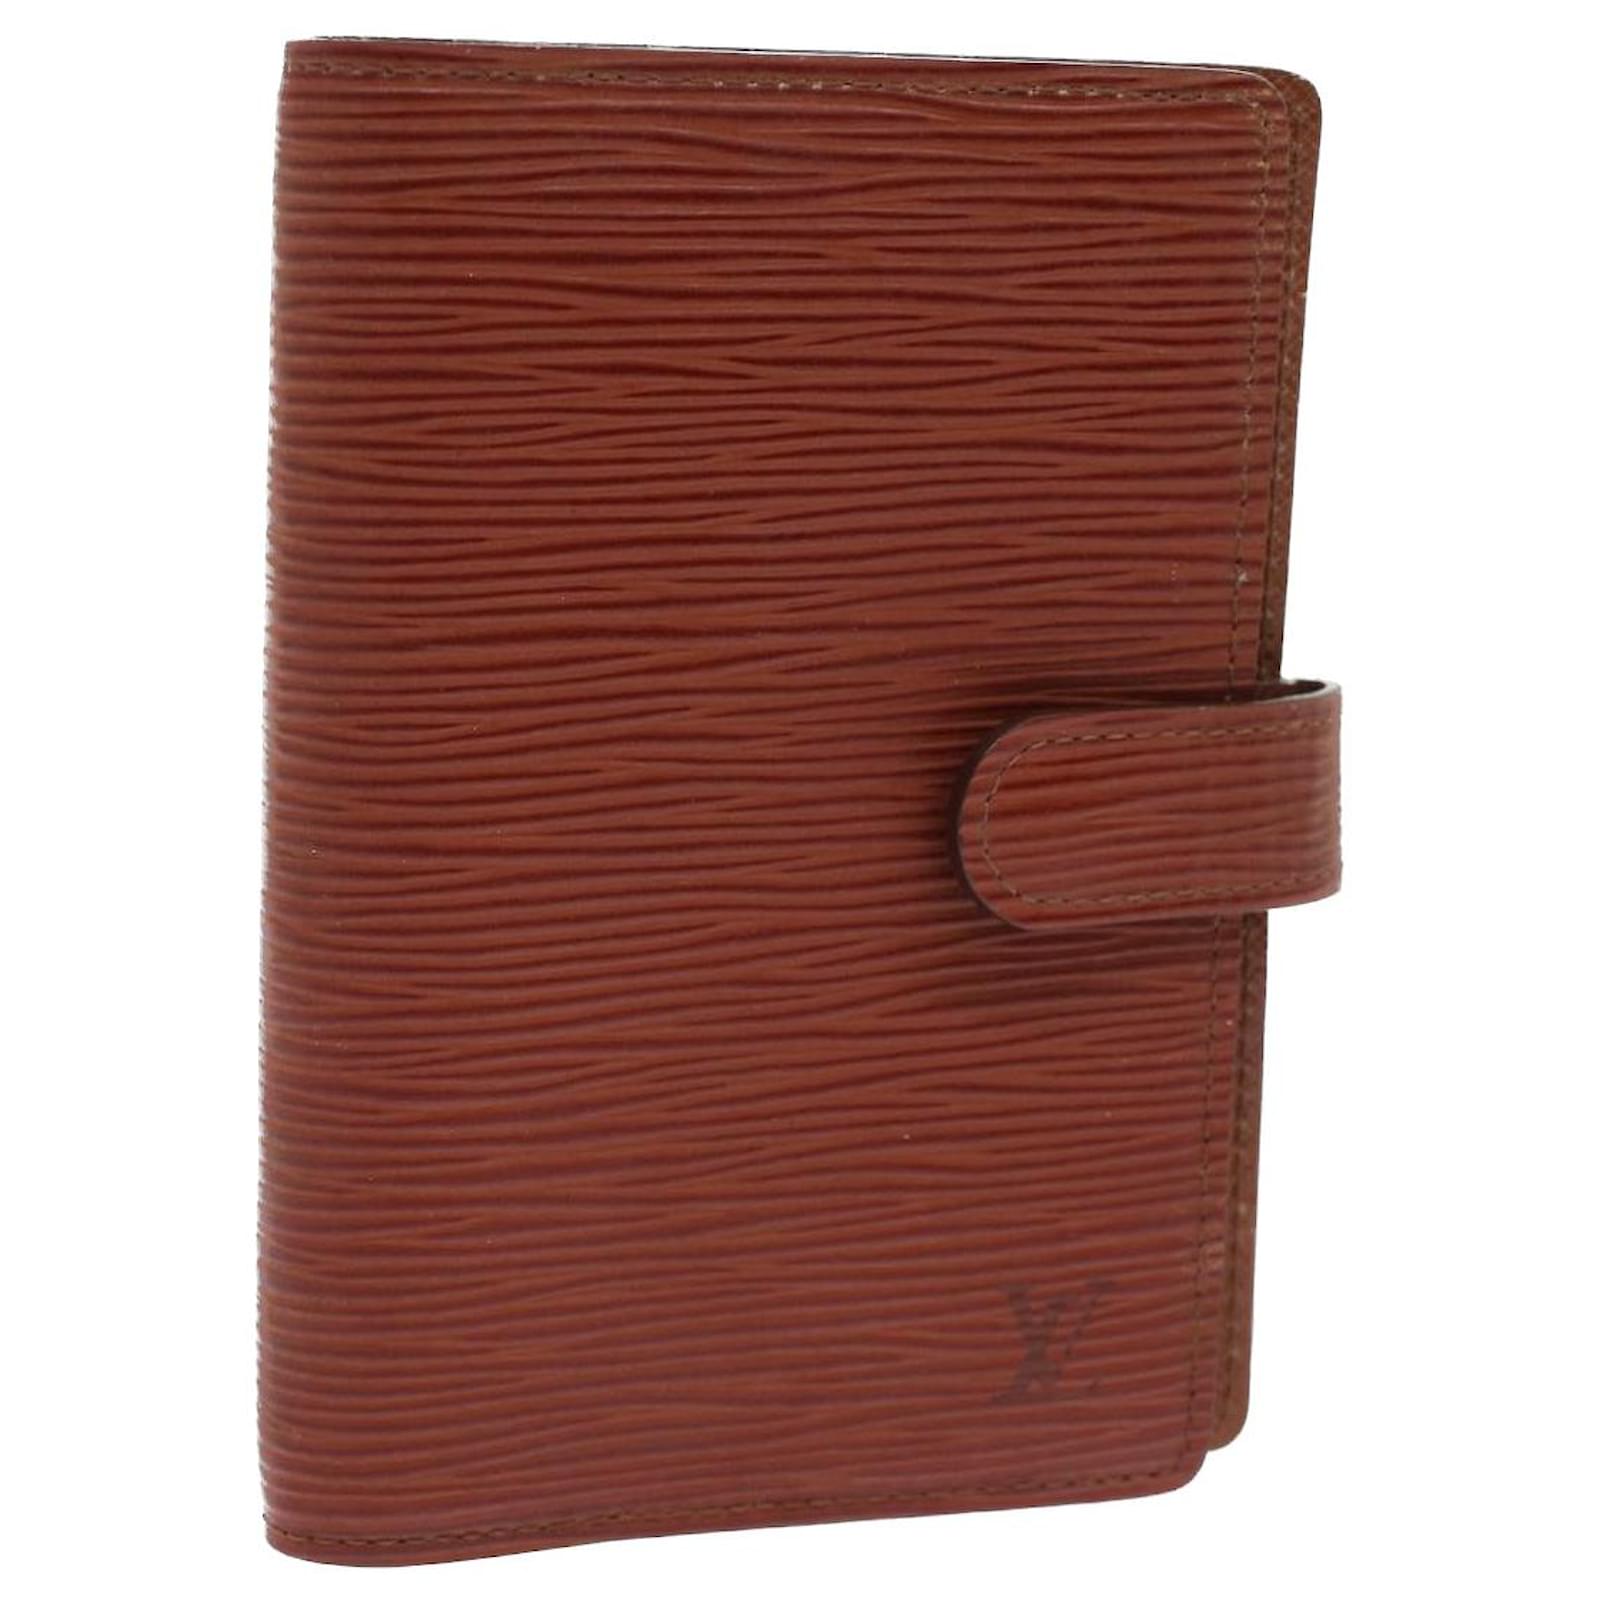 LOUIS VUITTON Epi Agenda PM MM Day Planner Cover Red Brown LV Auth